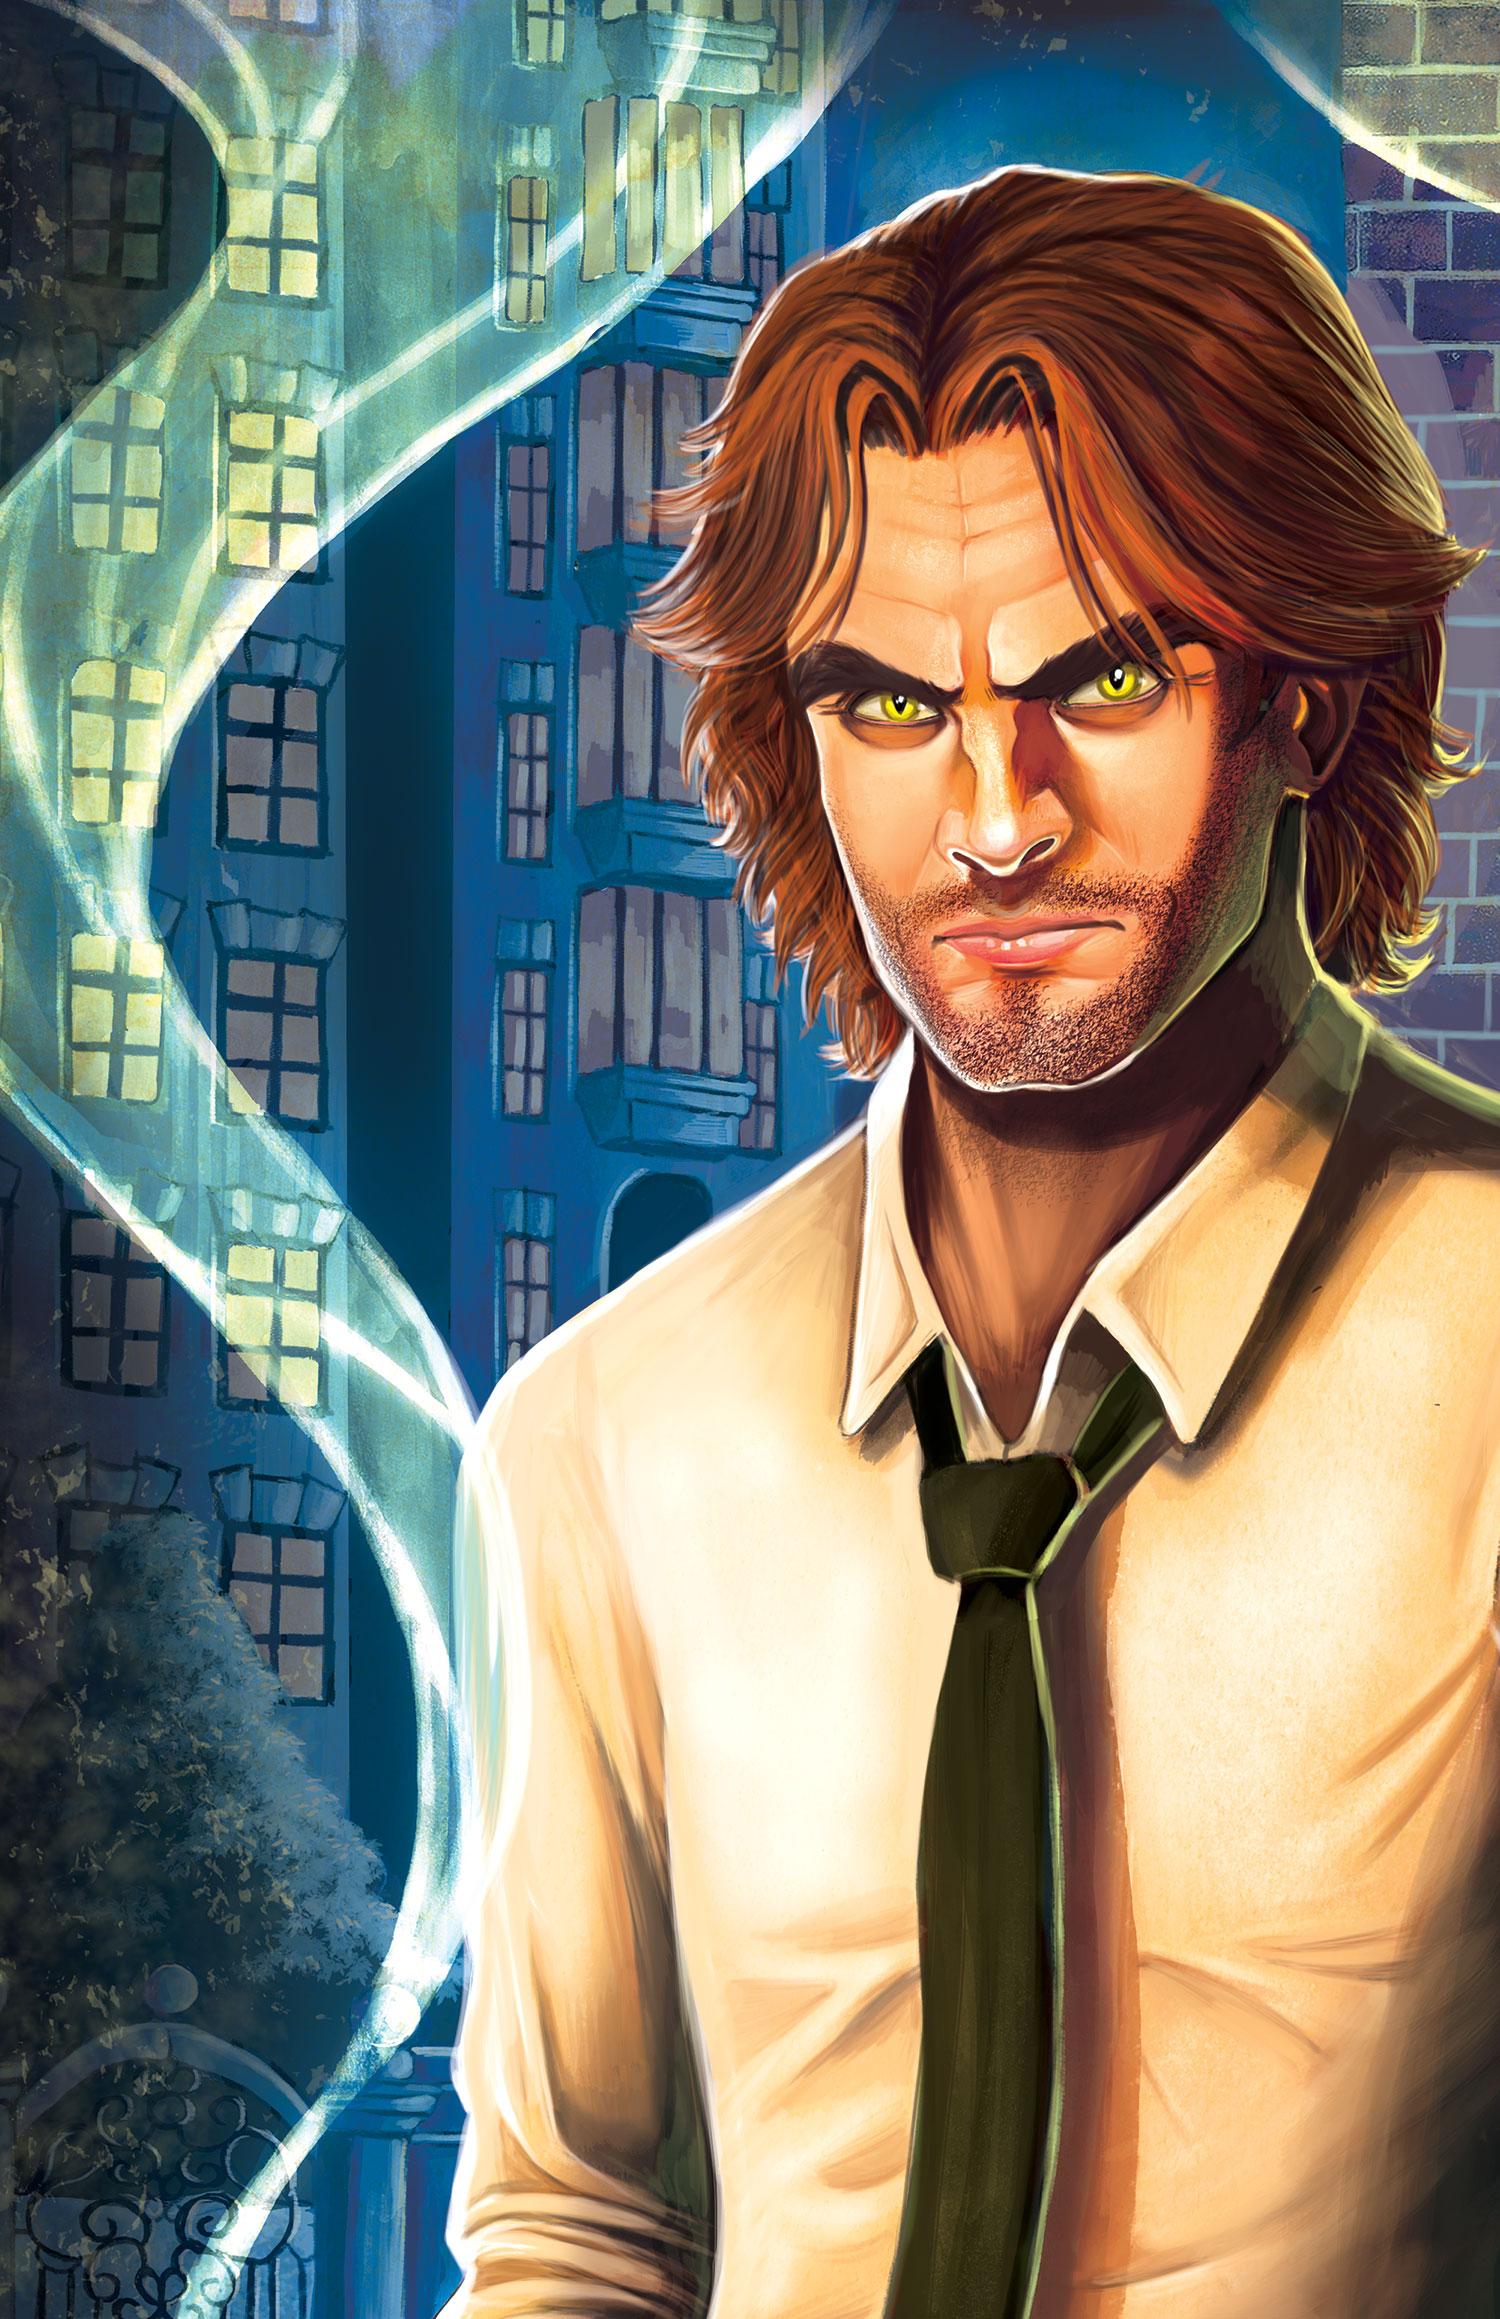 Fables: The Wolf Among Us Vol. 1 #8